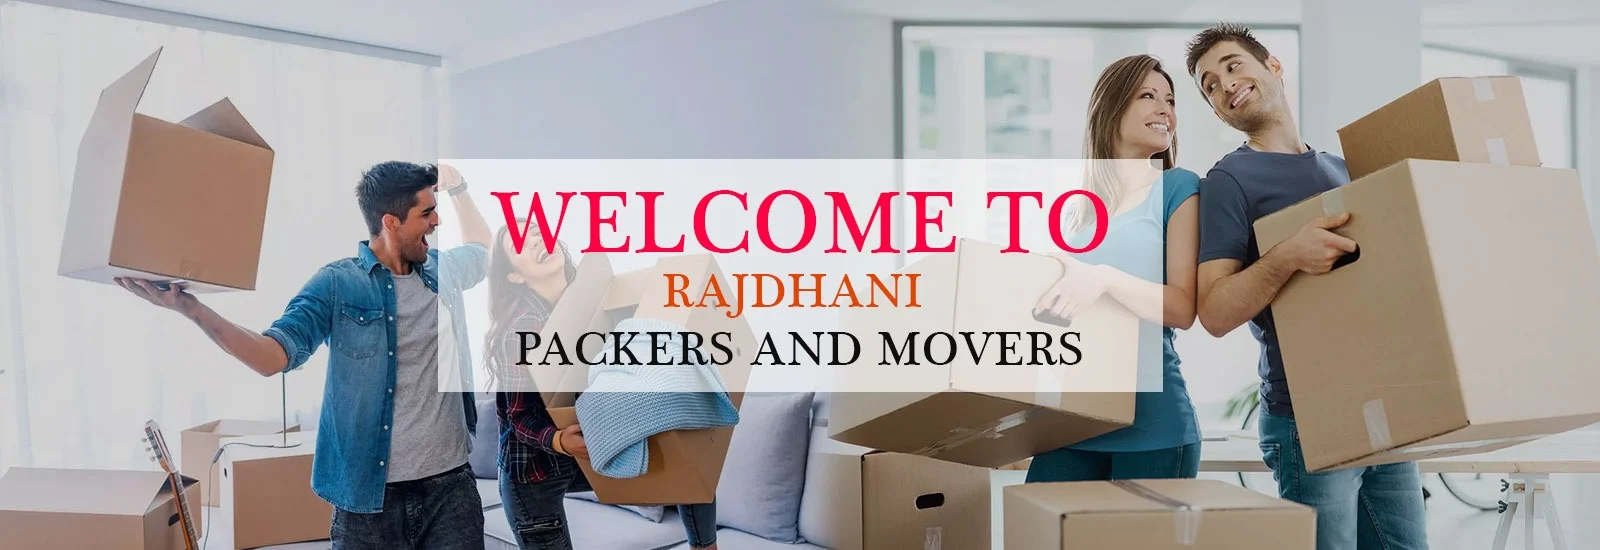 rajdhani packers and movers slider